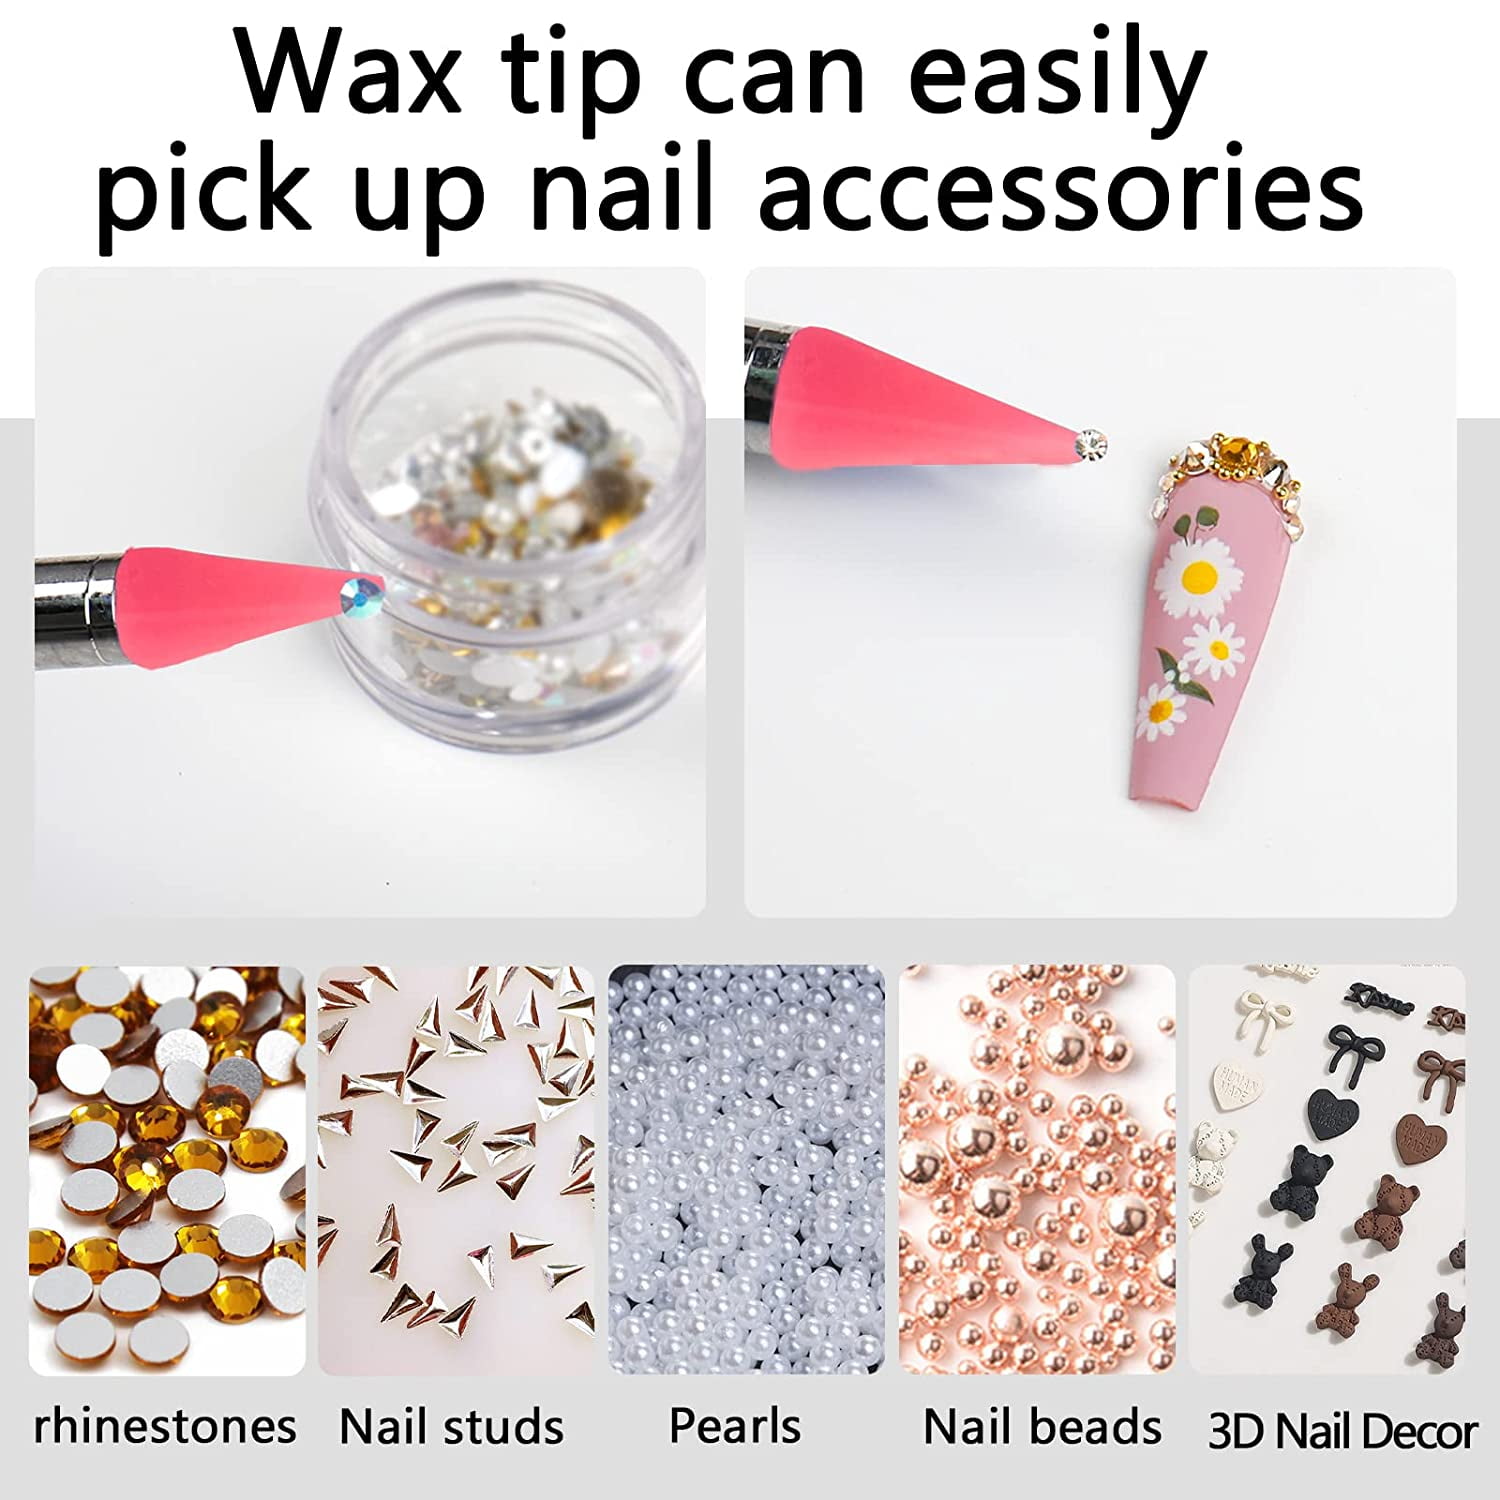 Menkey Dual-Ended Nail Rhinestone Picker Wax Silicone Tip Pencil Pick Up Applicator Dual Tips Dotting Pen Beads Gems Crystals Studs Picker with Acrylic